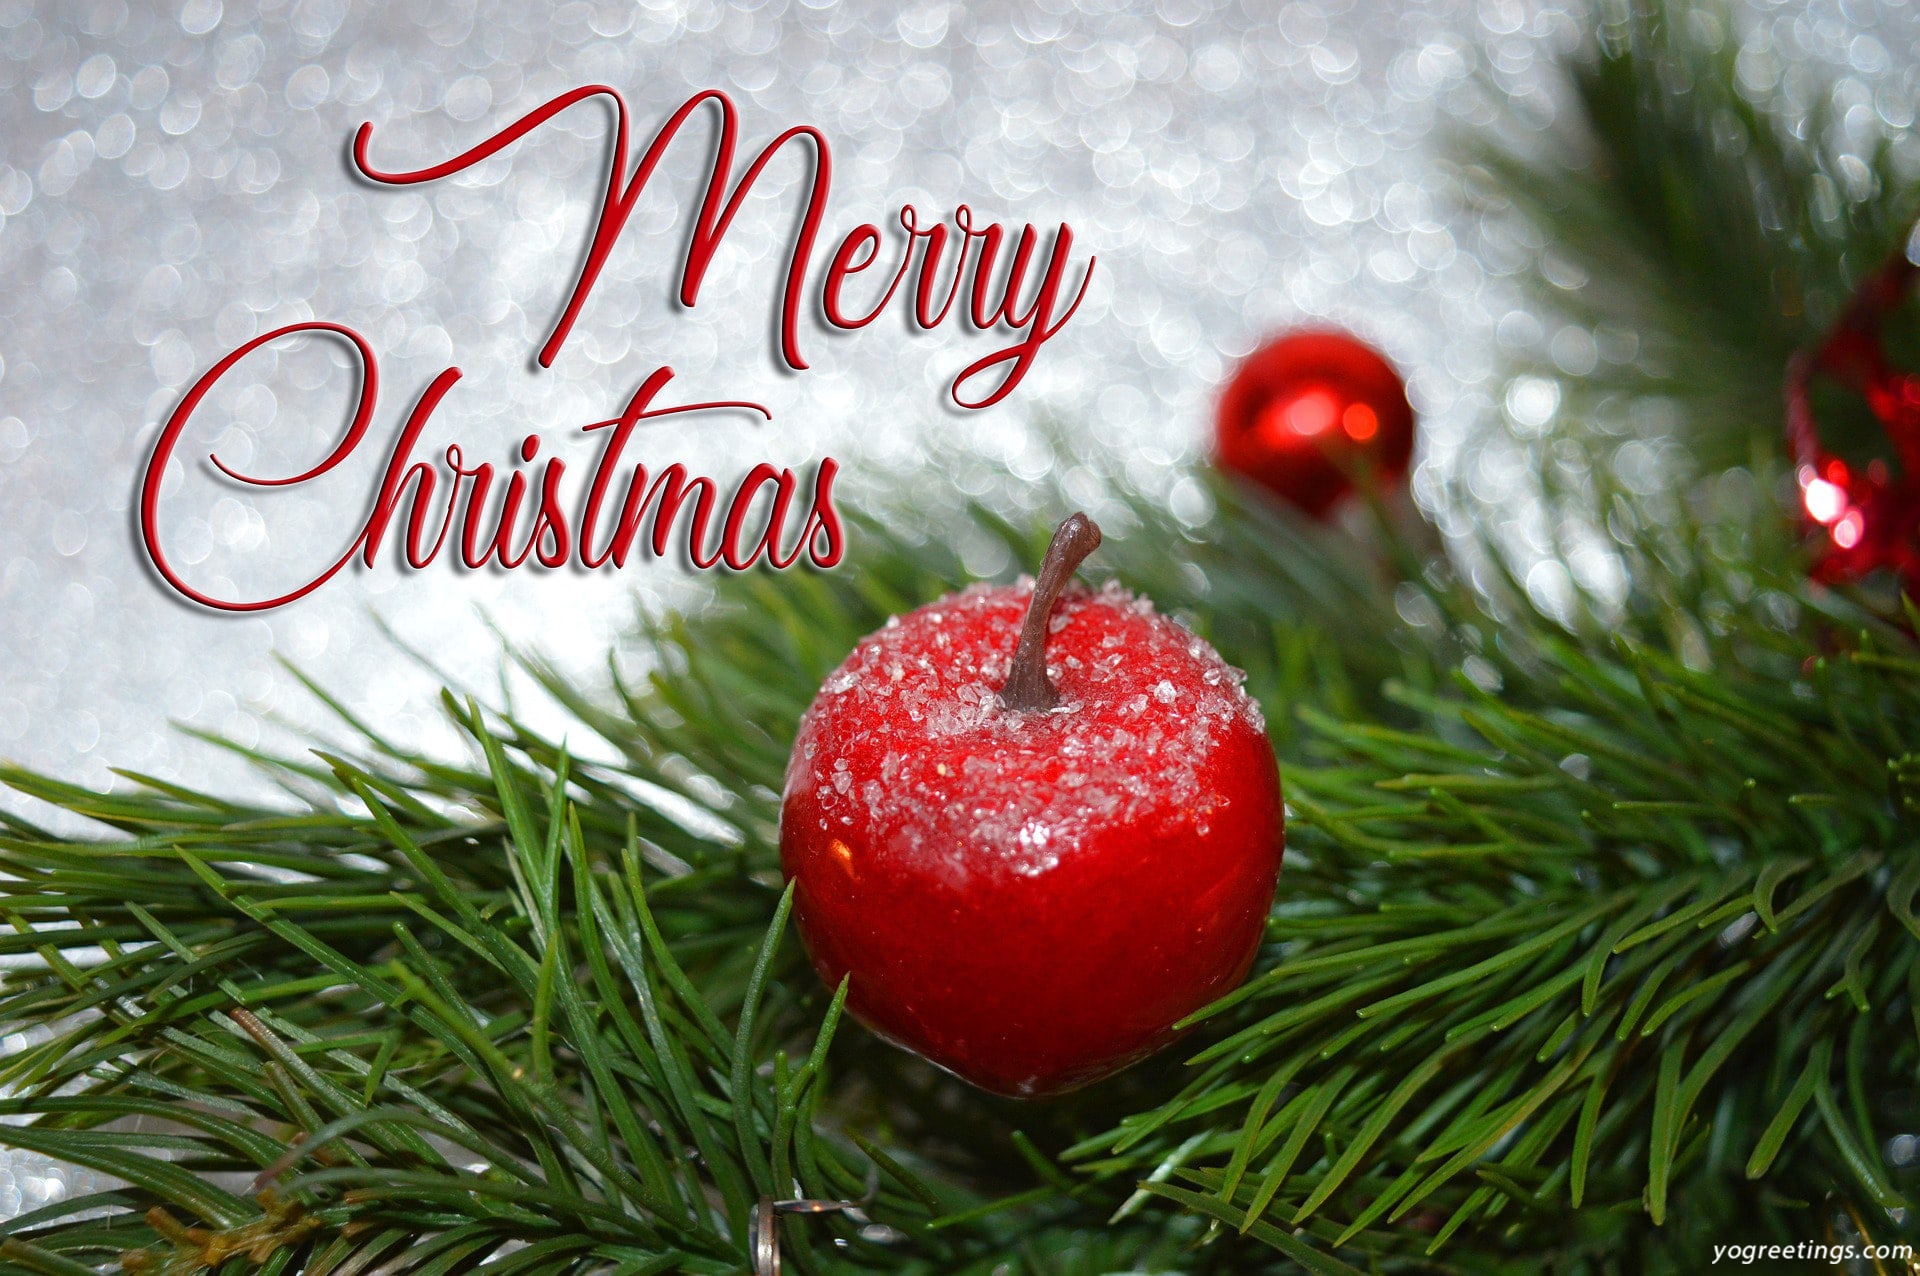 Merry Christmas Wallpaper Full HD Free Download - Images 12